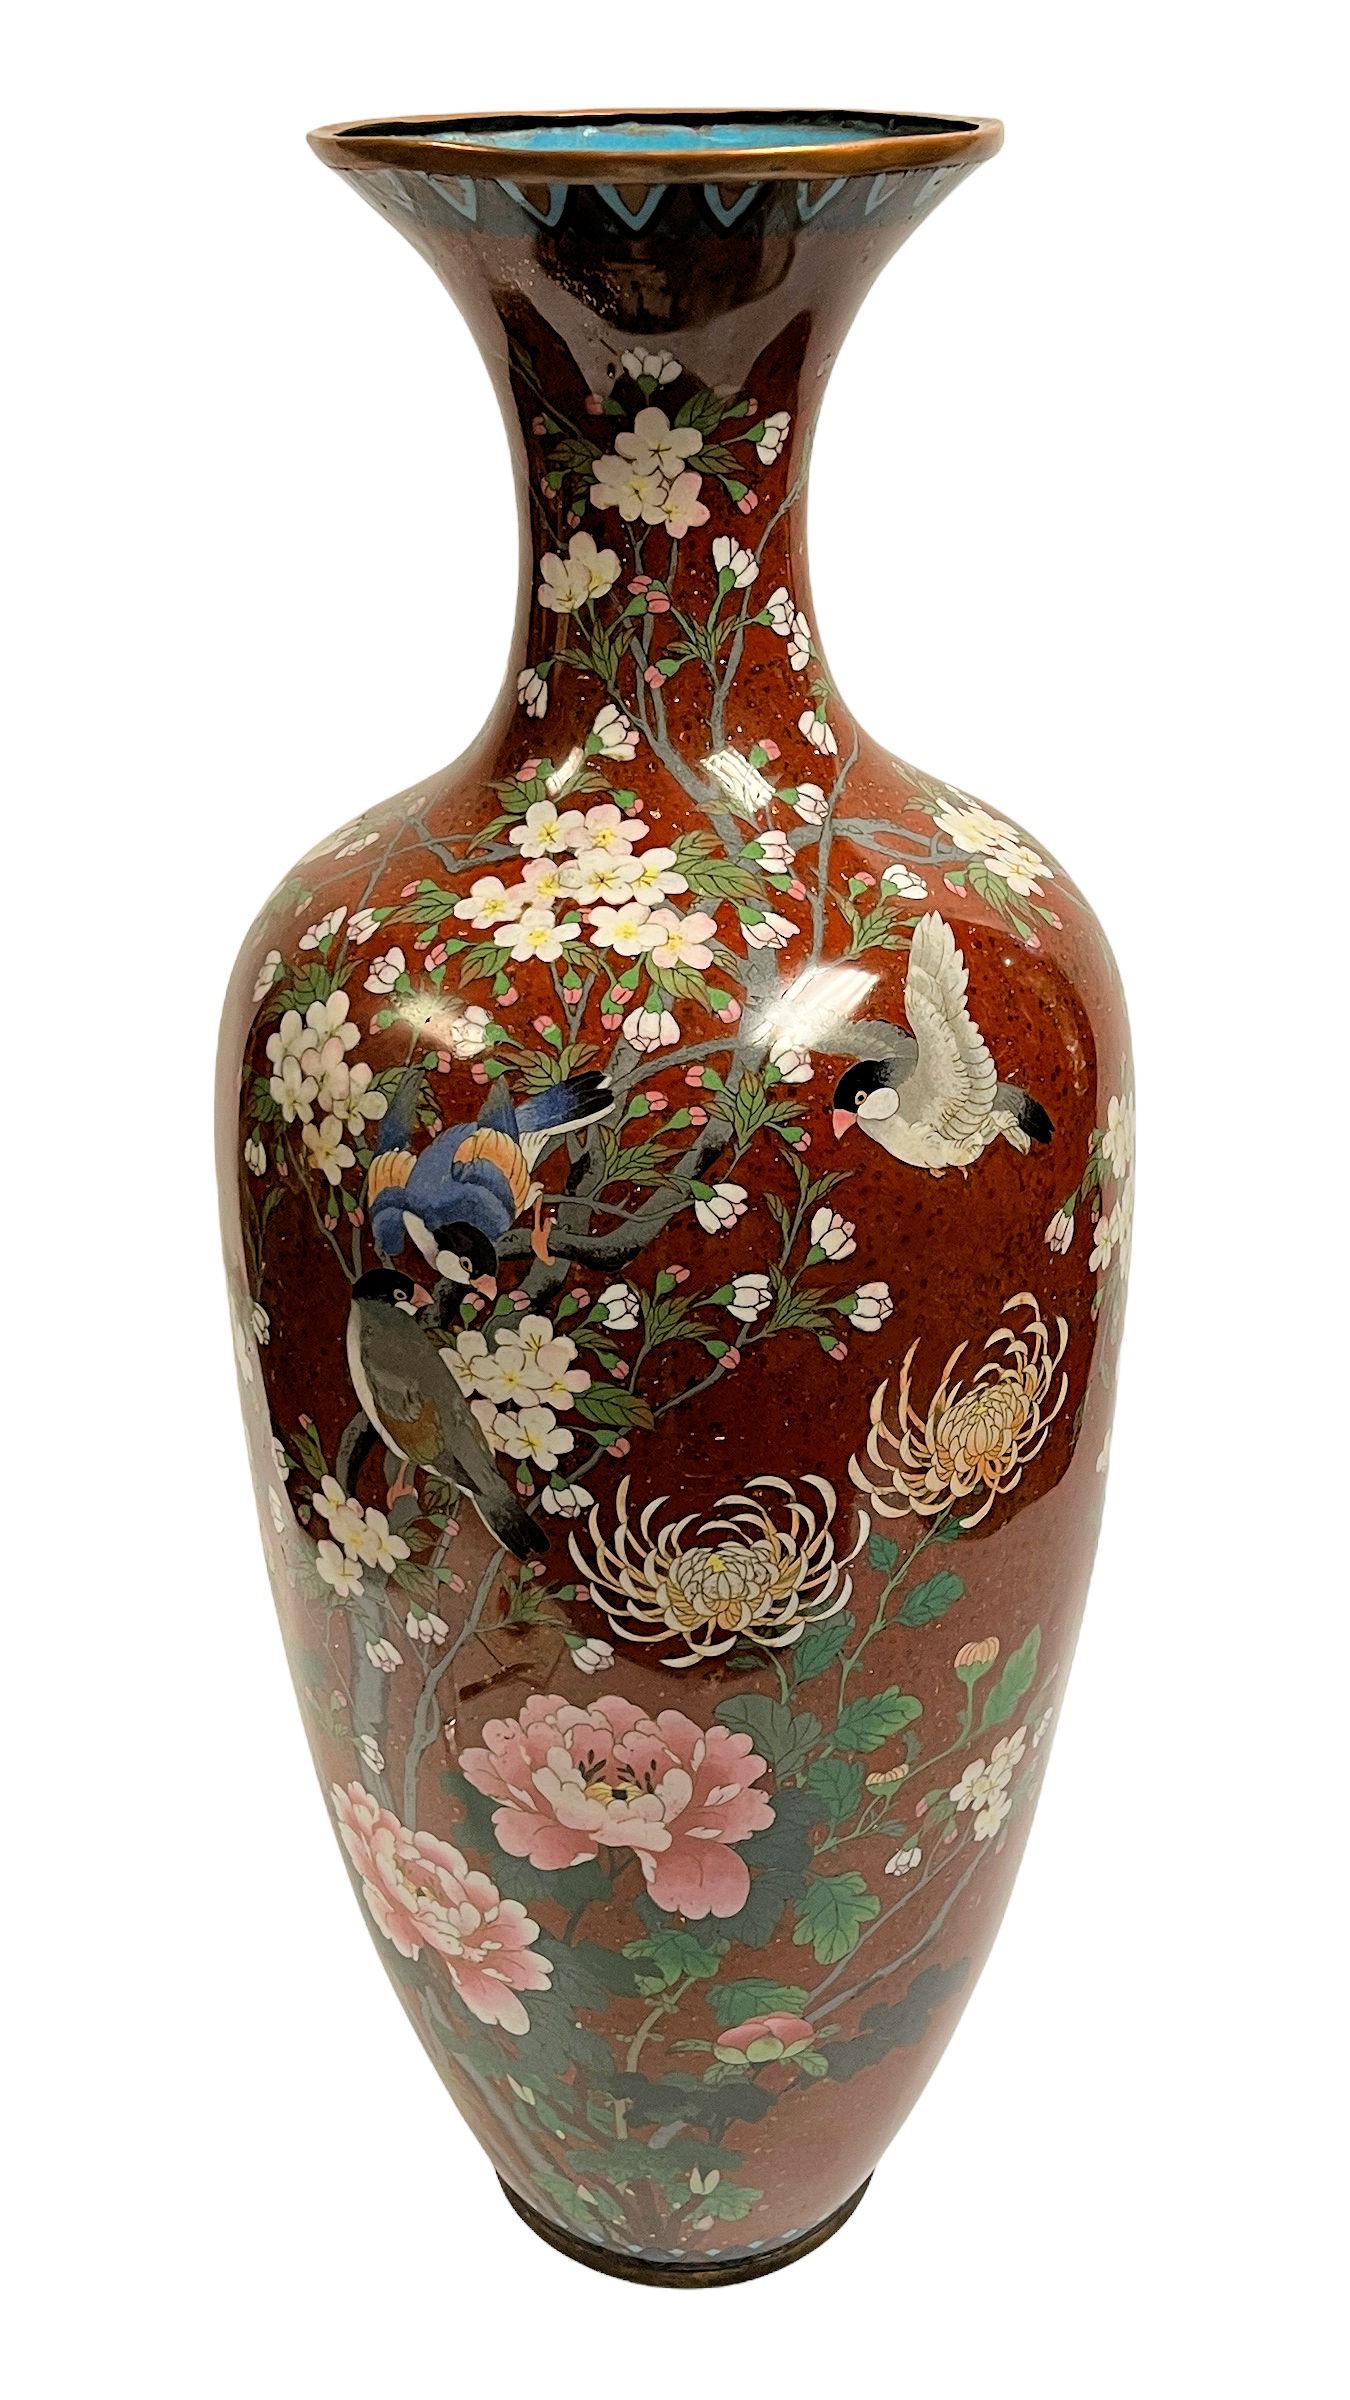 Large Japanese Cloisonne Vase with very nice floral and birds motif.